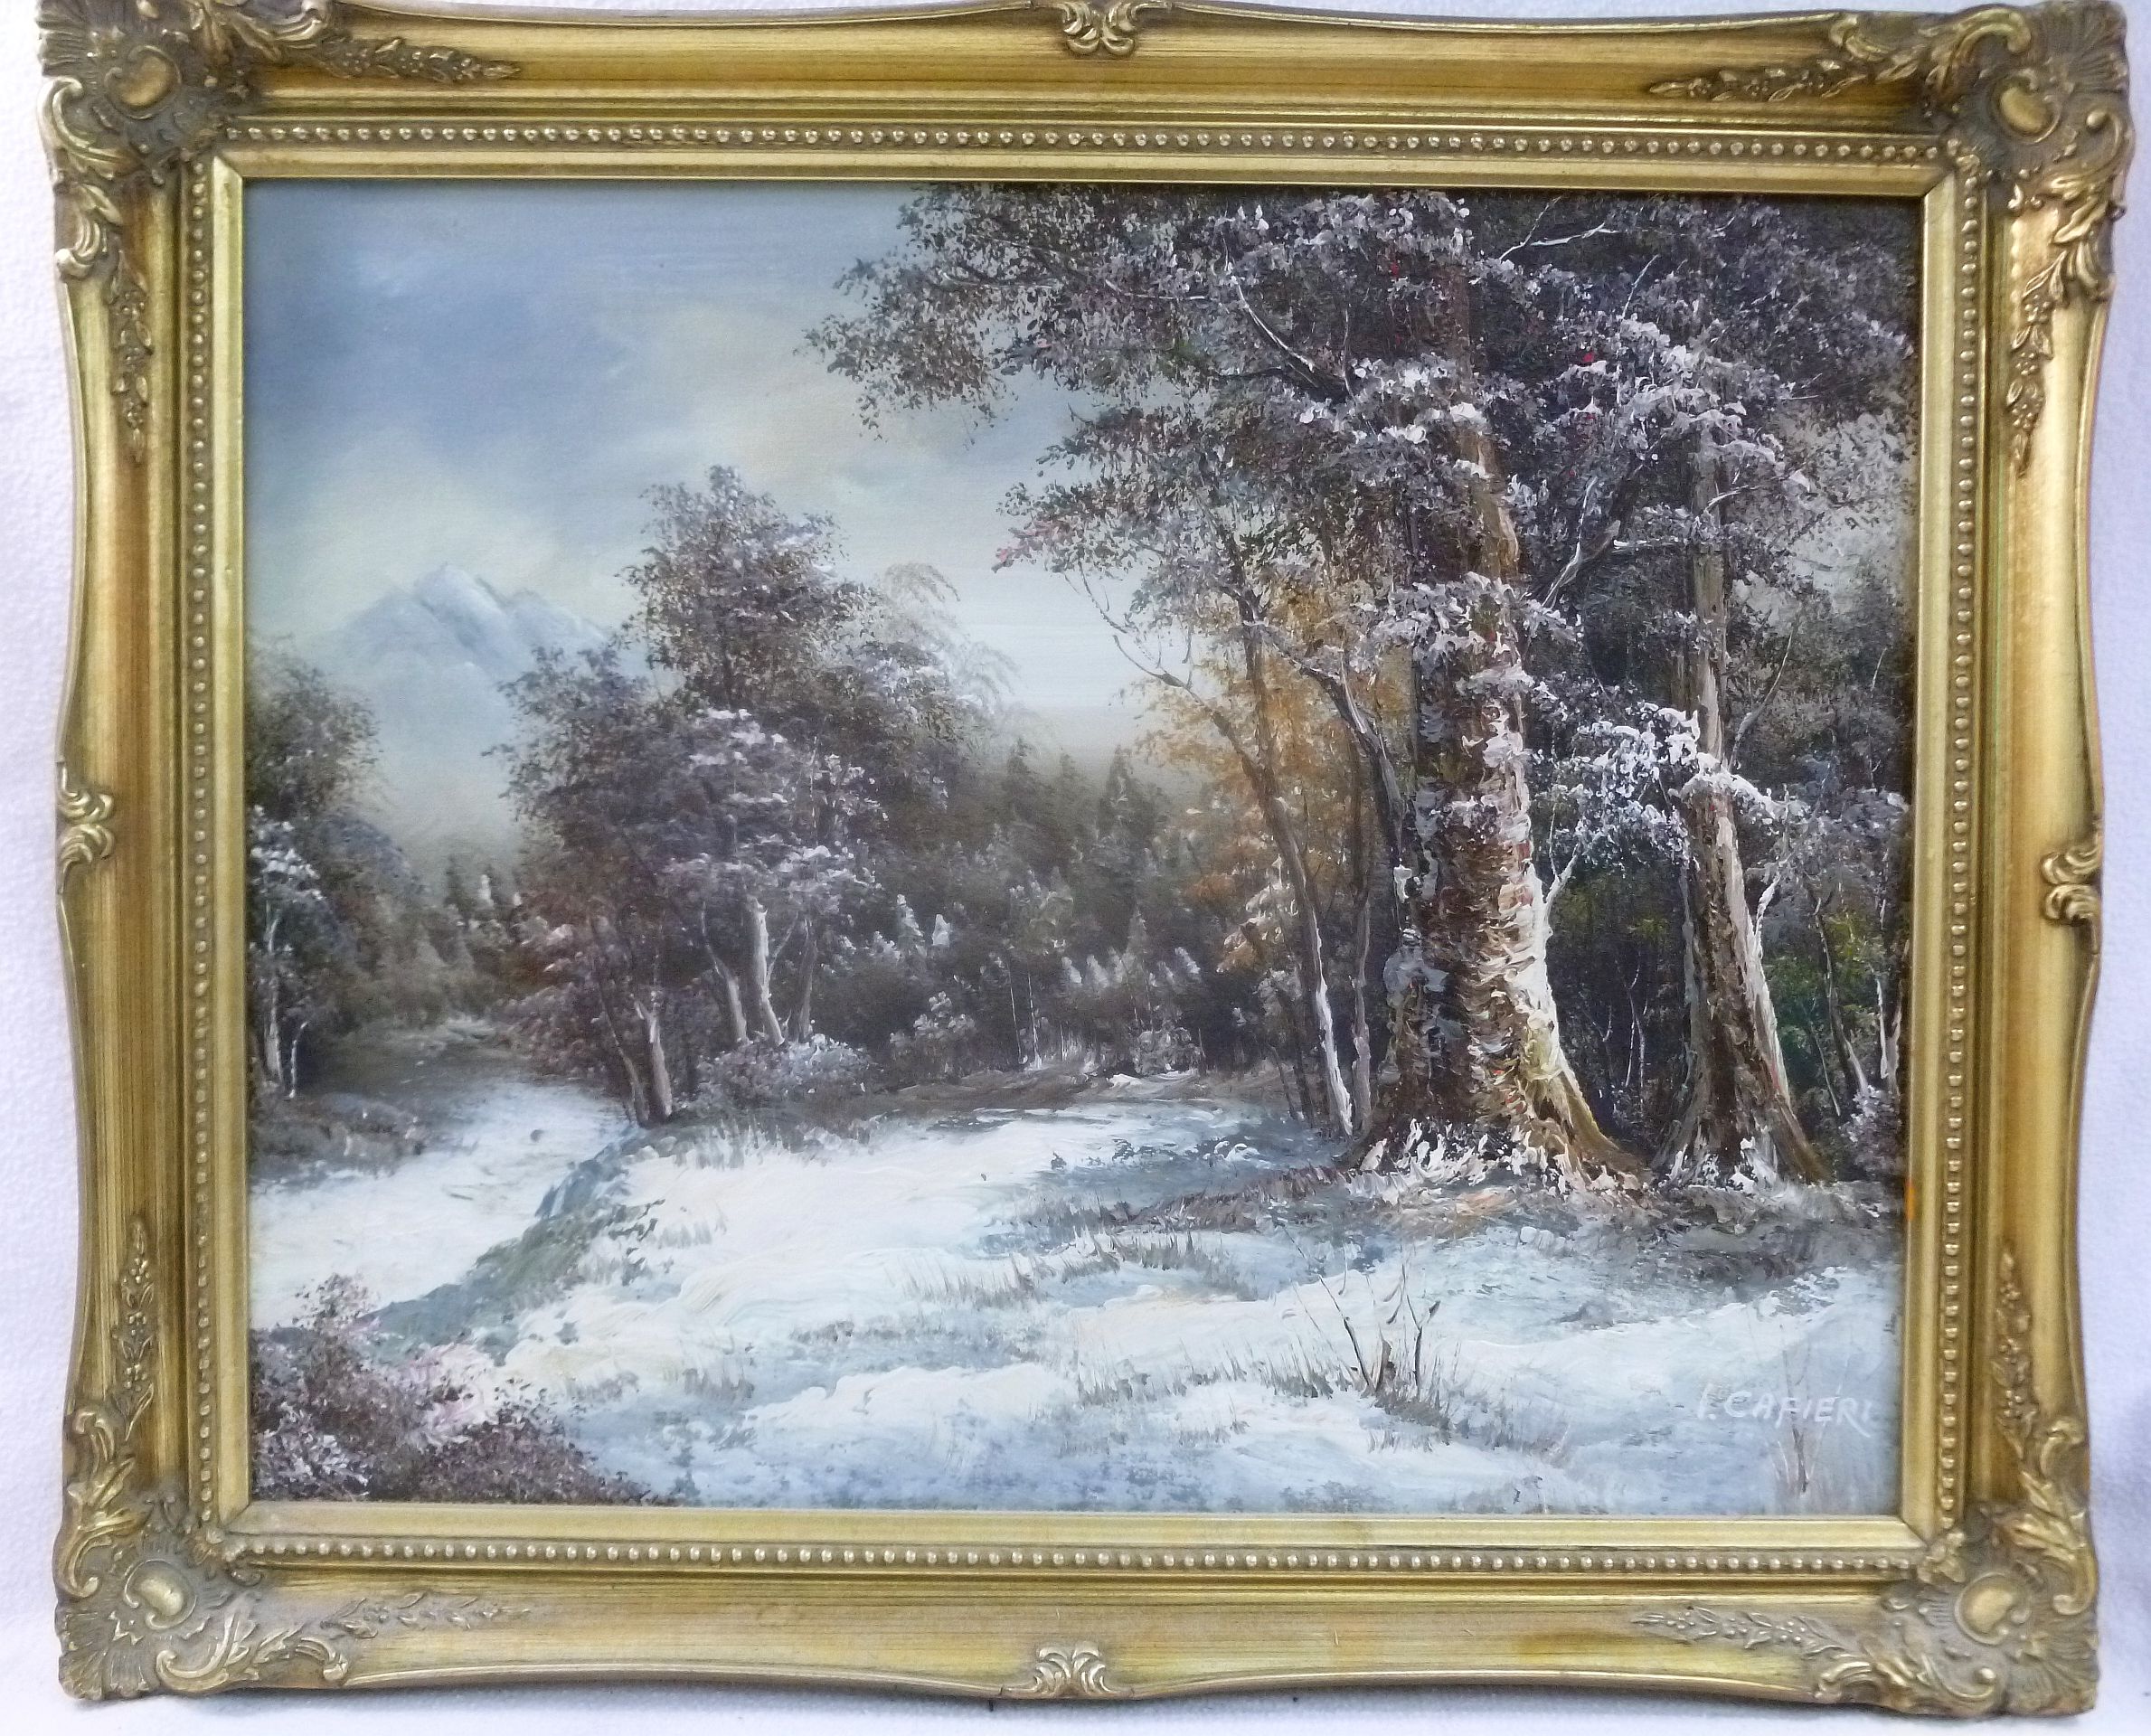 Irene Cafieri (20th century Hong Kong), Snow scene, oil on canvas, signed lower right, 39.5cm x 49. - Image 2 of 2